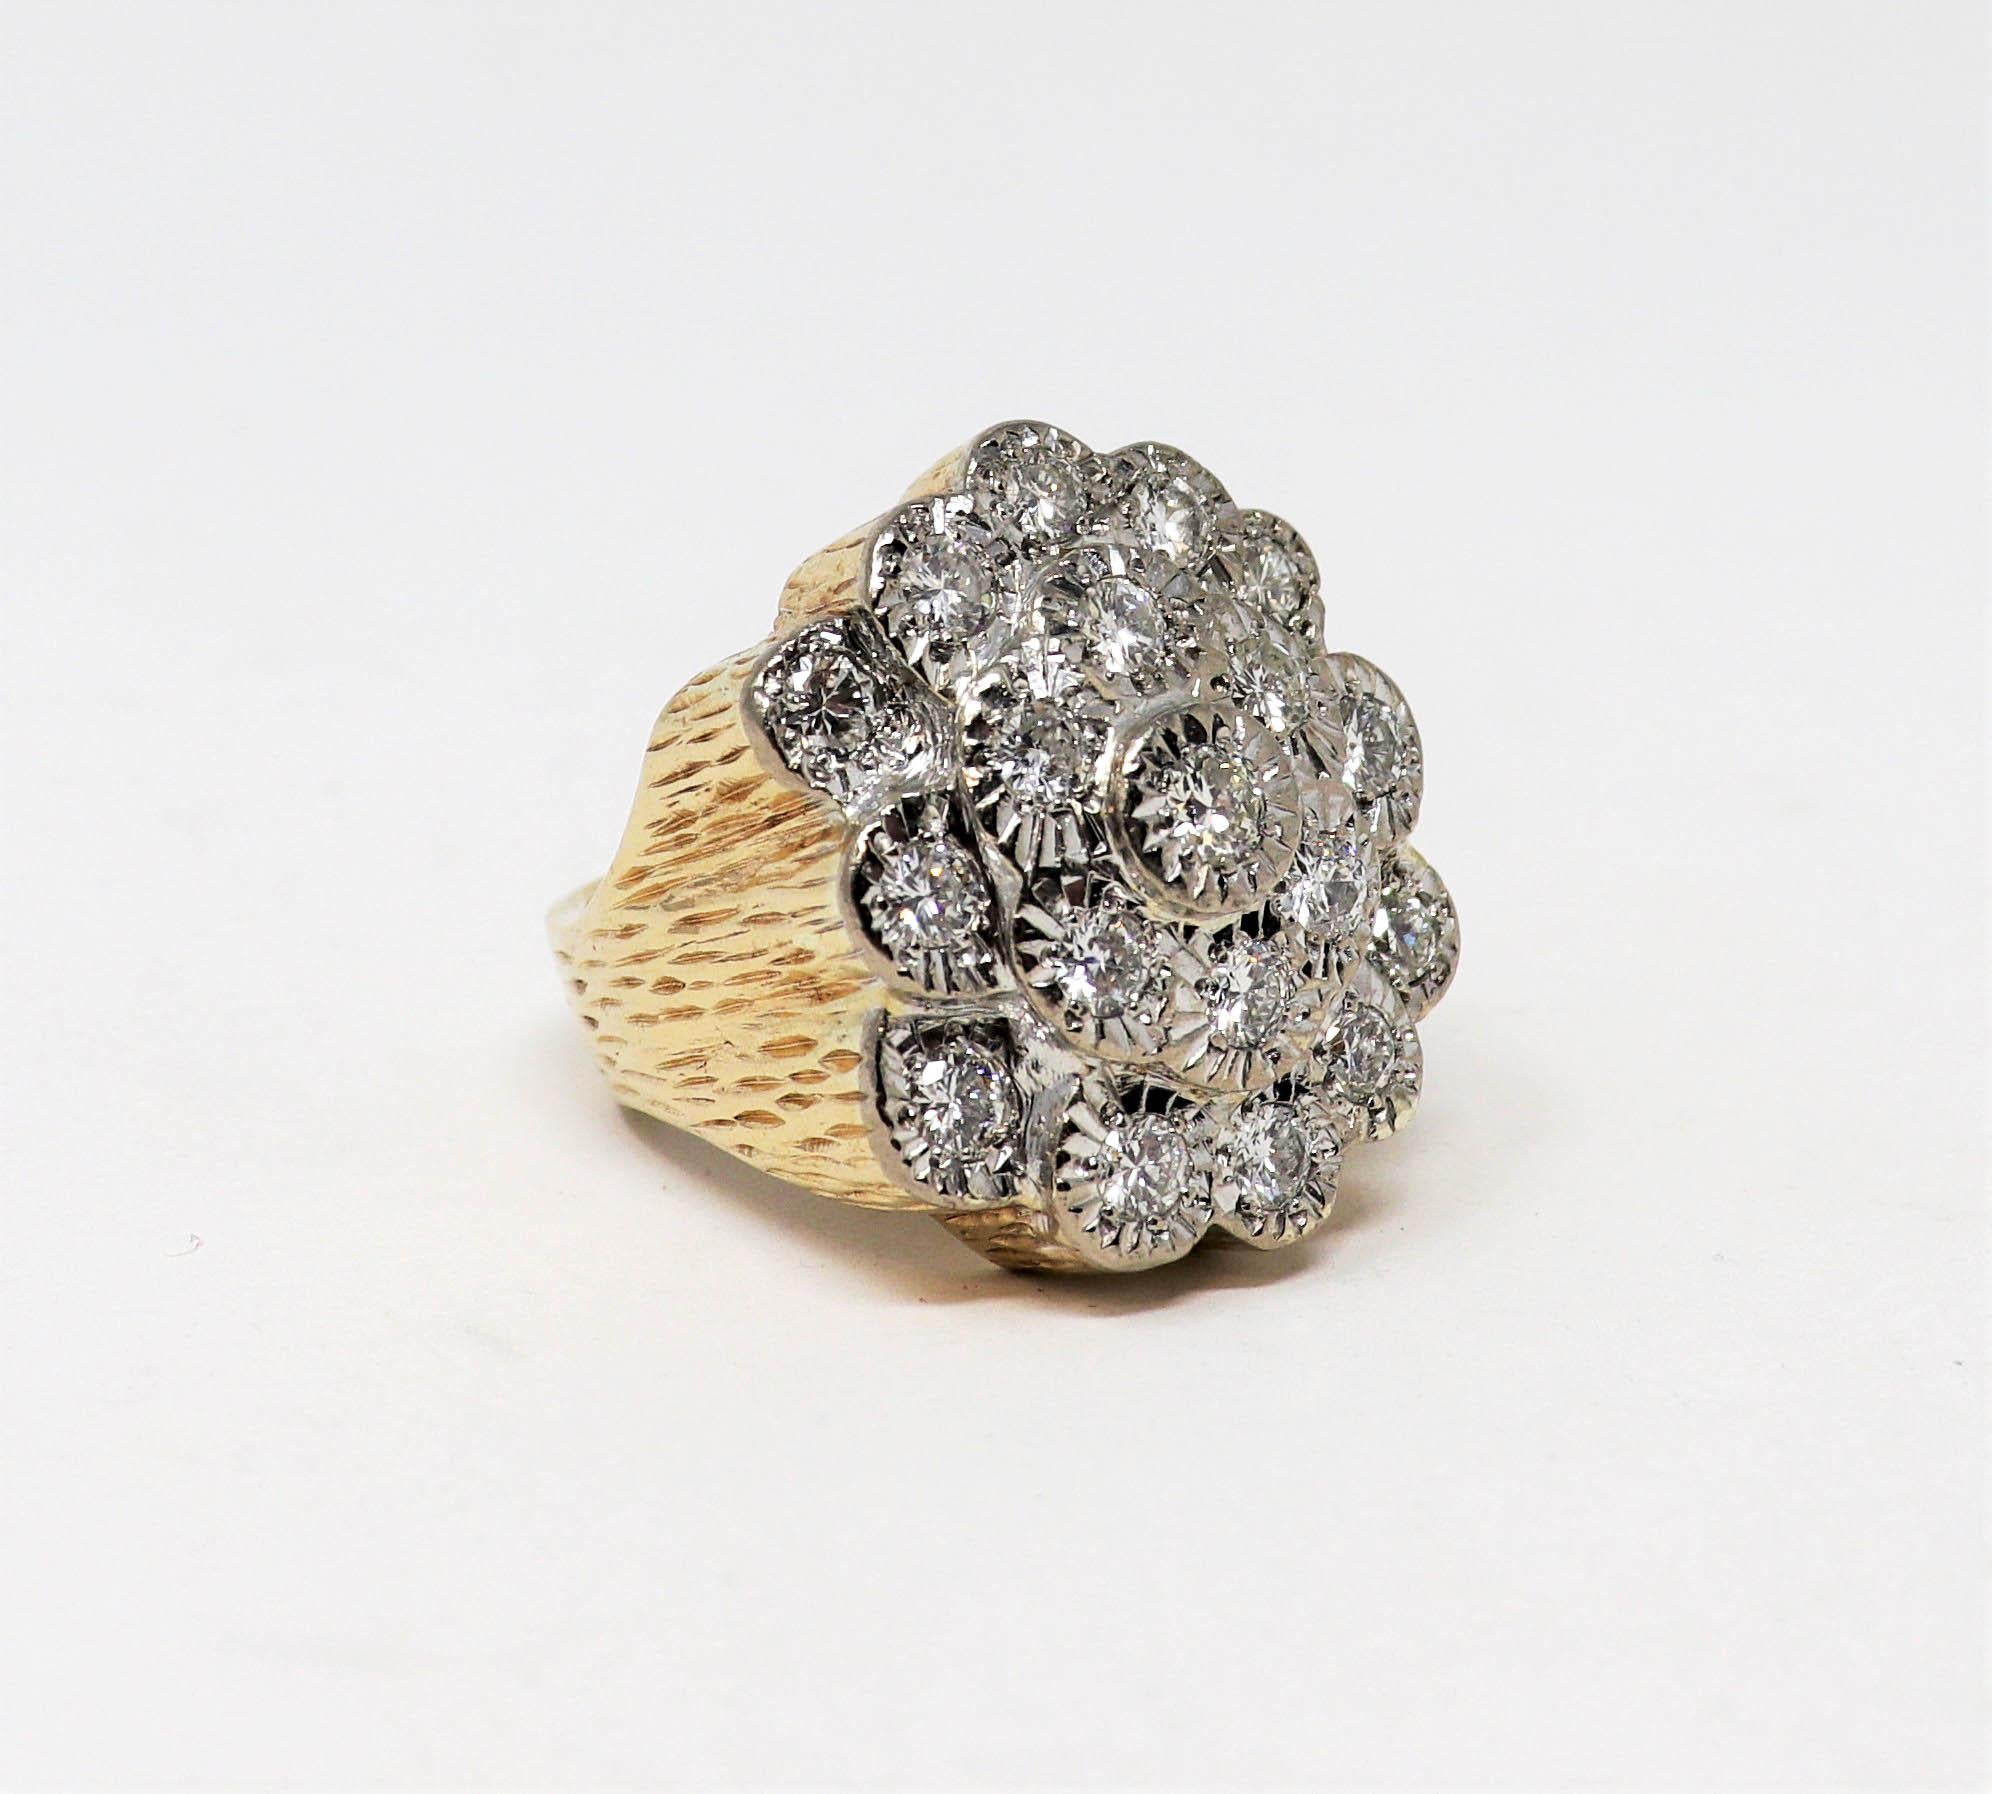 Ring Size: 11.25

This massive diamond statement ring gives off massive sparkle! The unique clustered design fills the finger from edge to edge with icy white brilliance, while the bold, textured yellow gold setting gives it a one of a kind look.